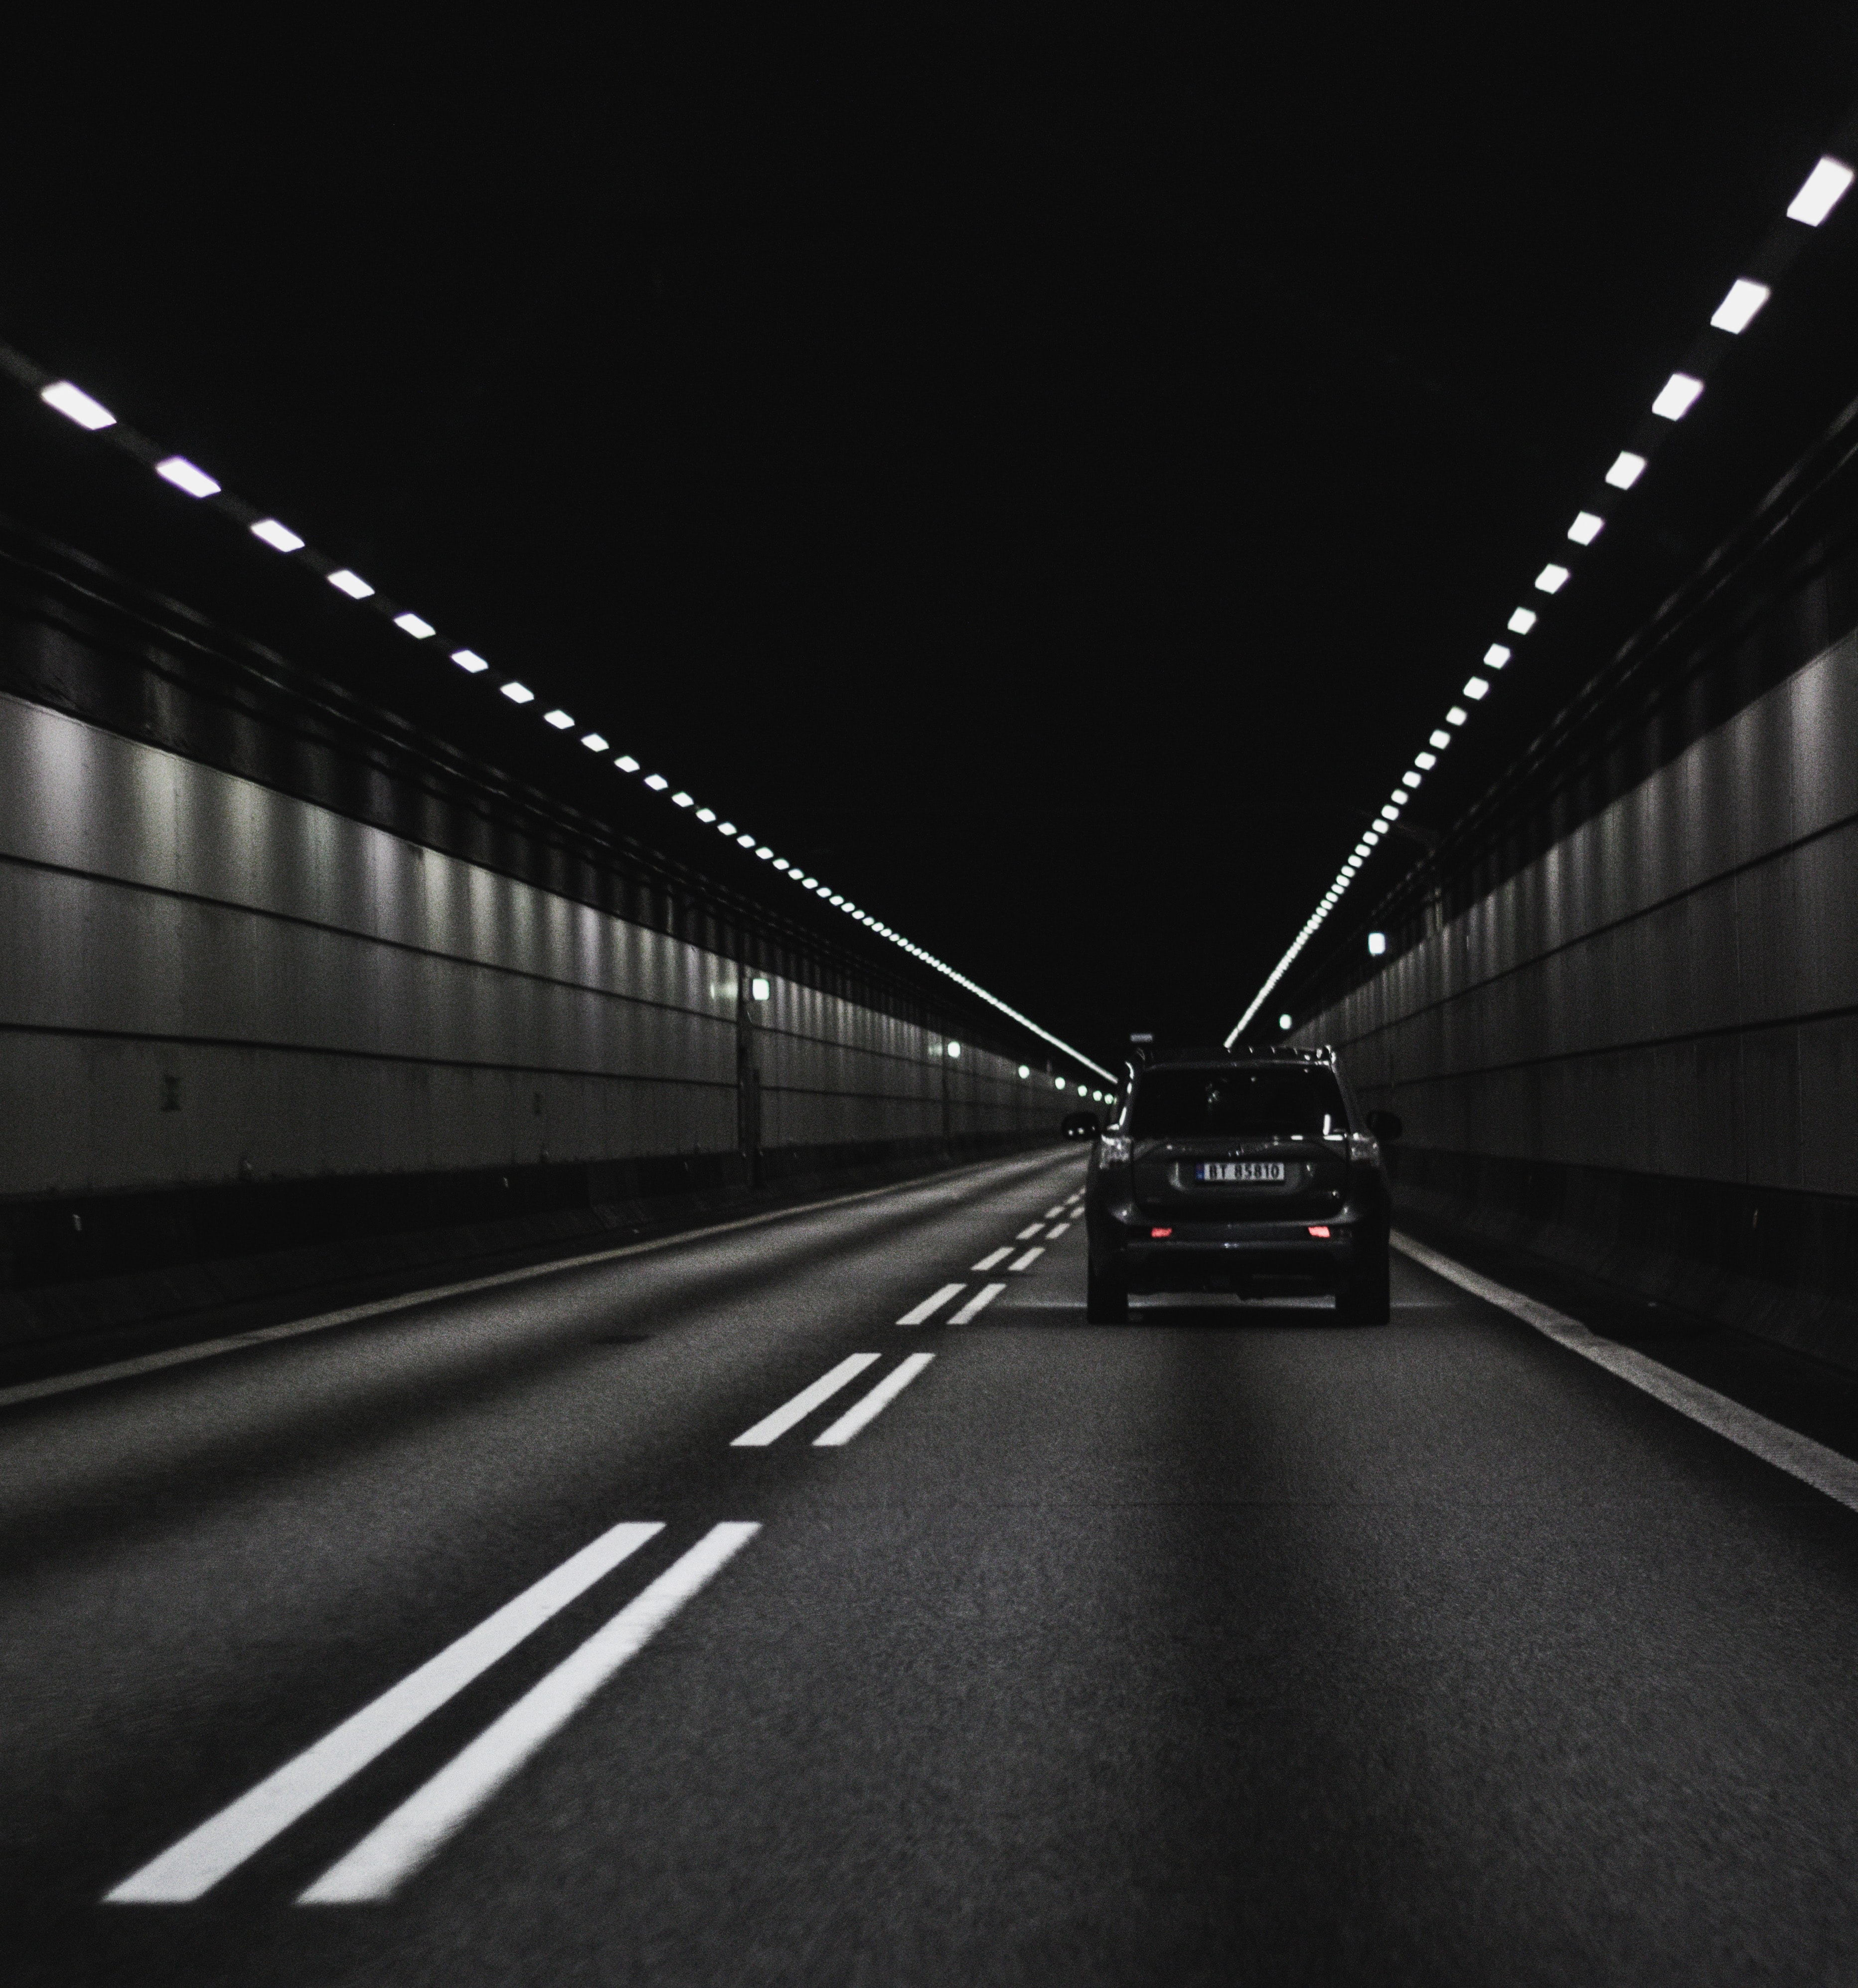 chb, cars, markup, car, back view, rear view, bw, tunnel